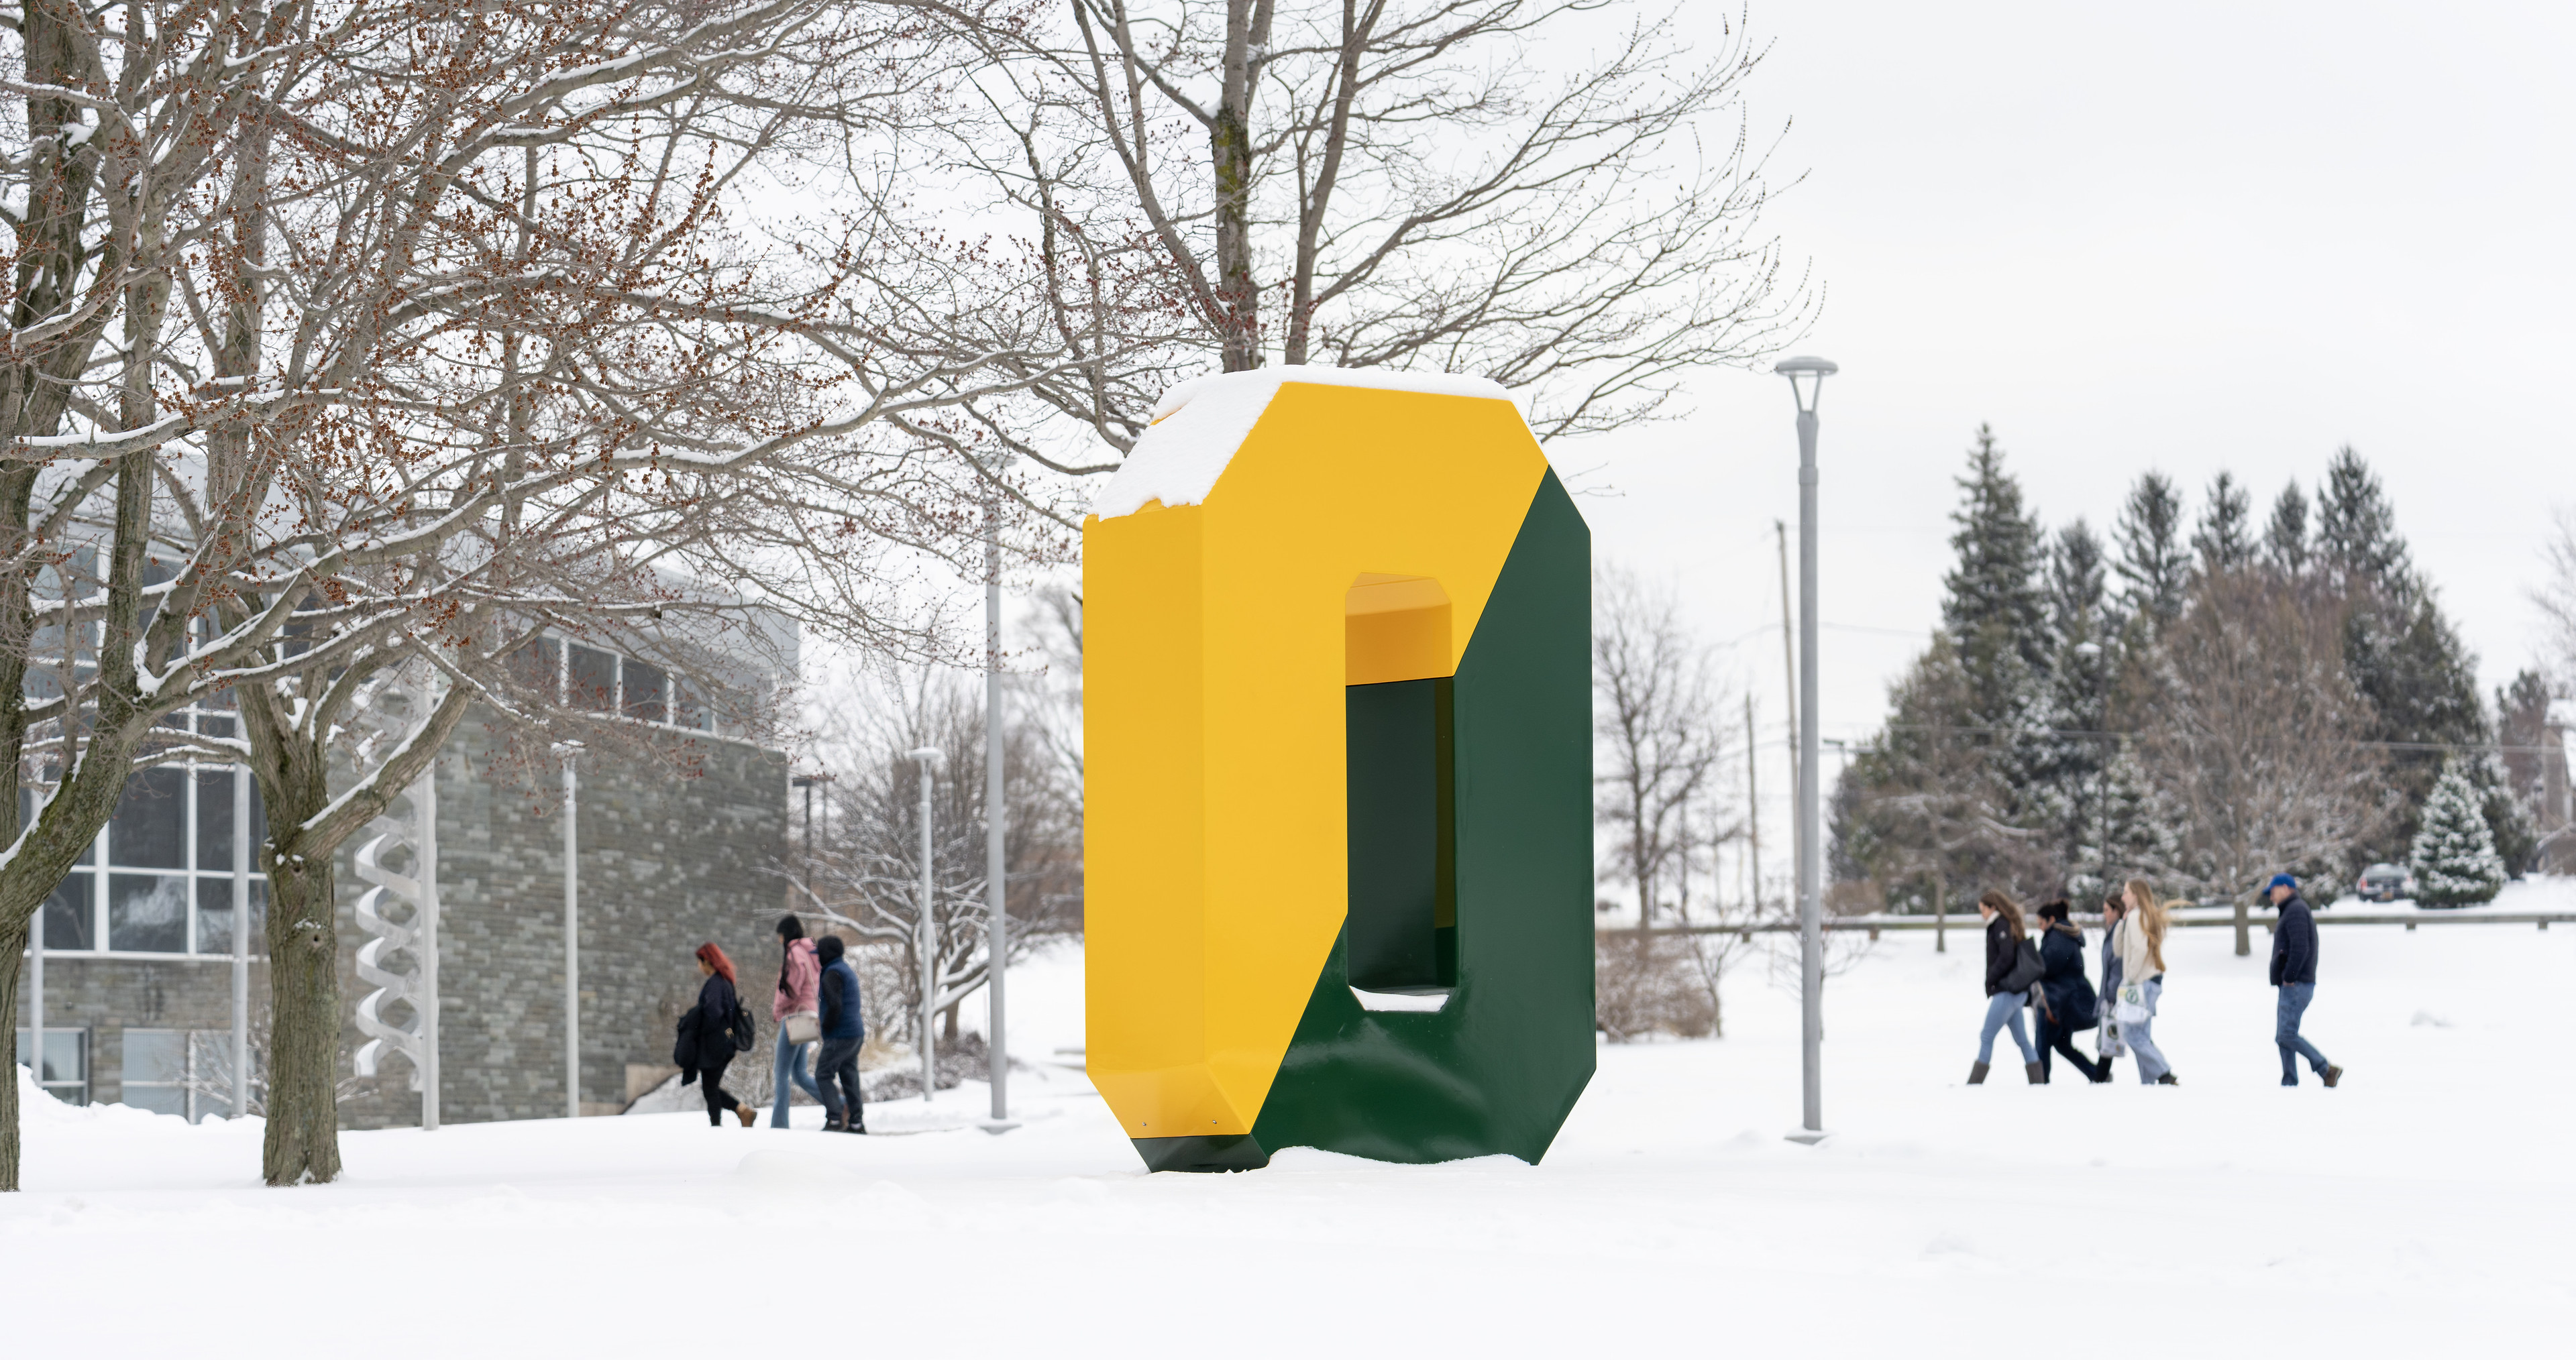 Hundreds of future Lakers and their families attended SUNY Oswego's first Admitted Student Day on March 23 for tours, networking, information sessions and more opportunities to get to know the university. 